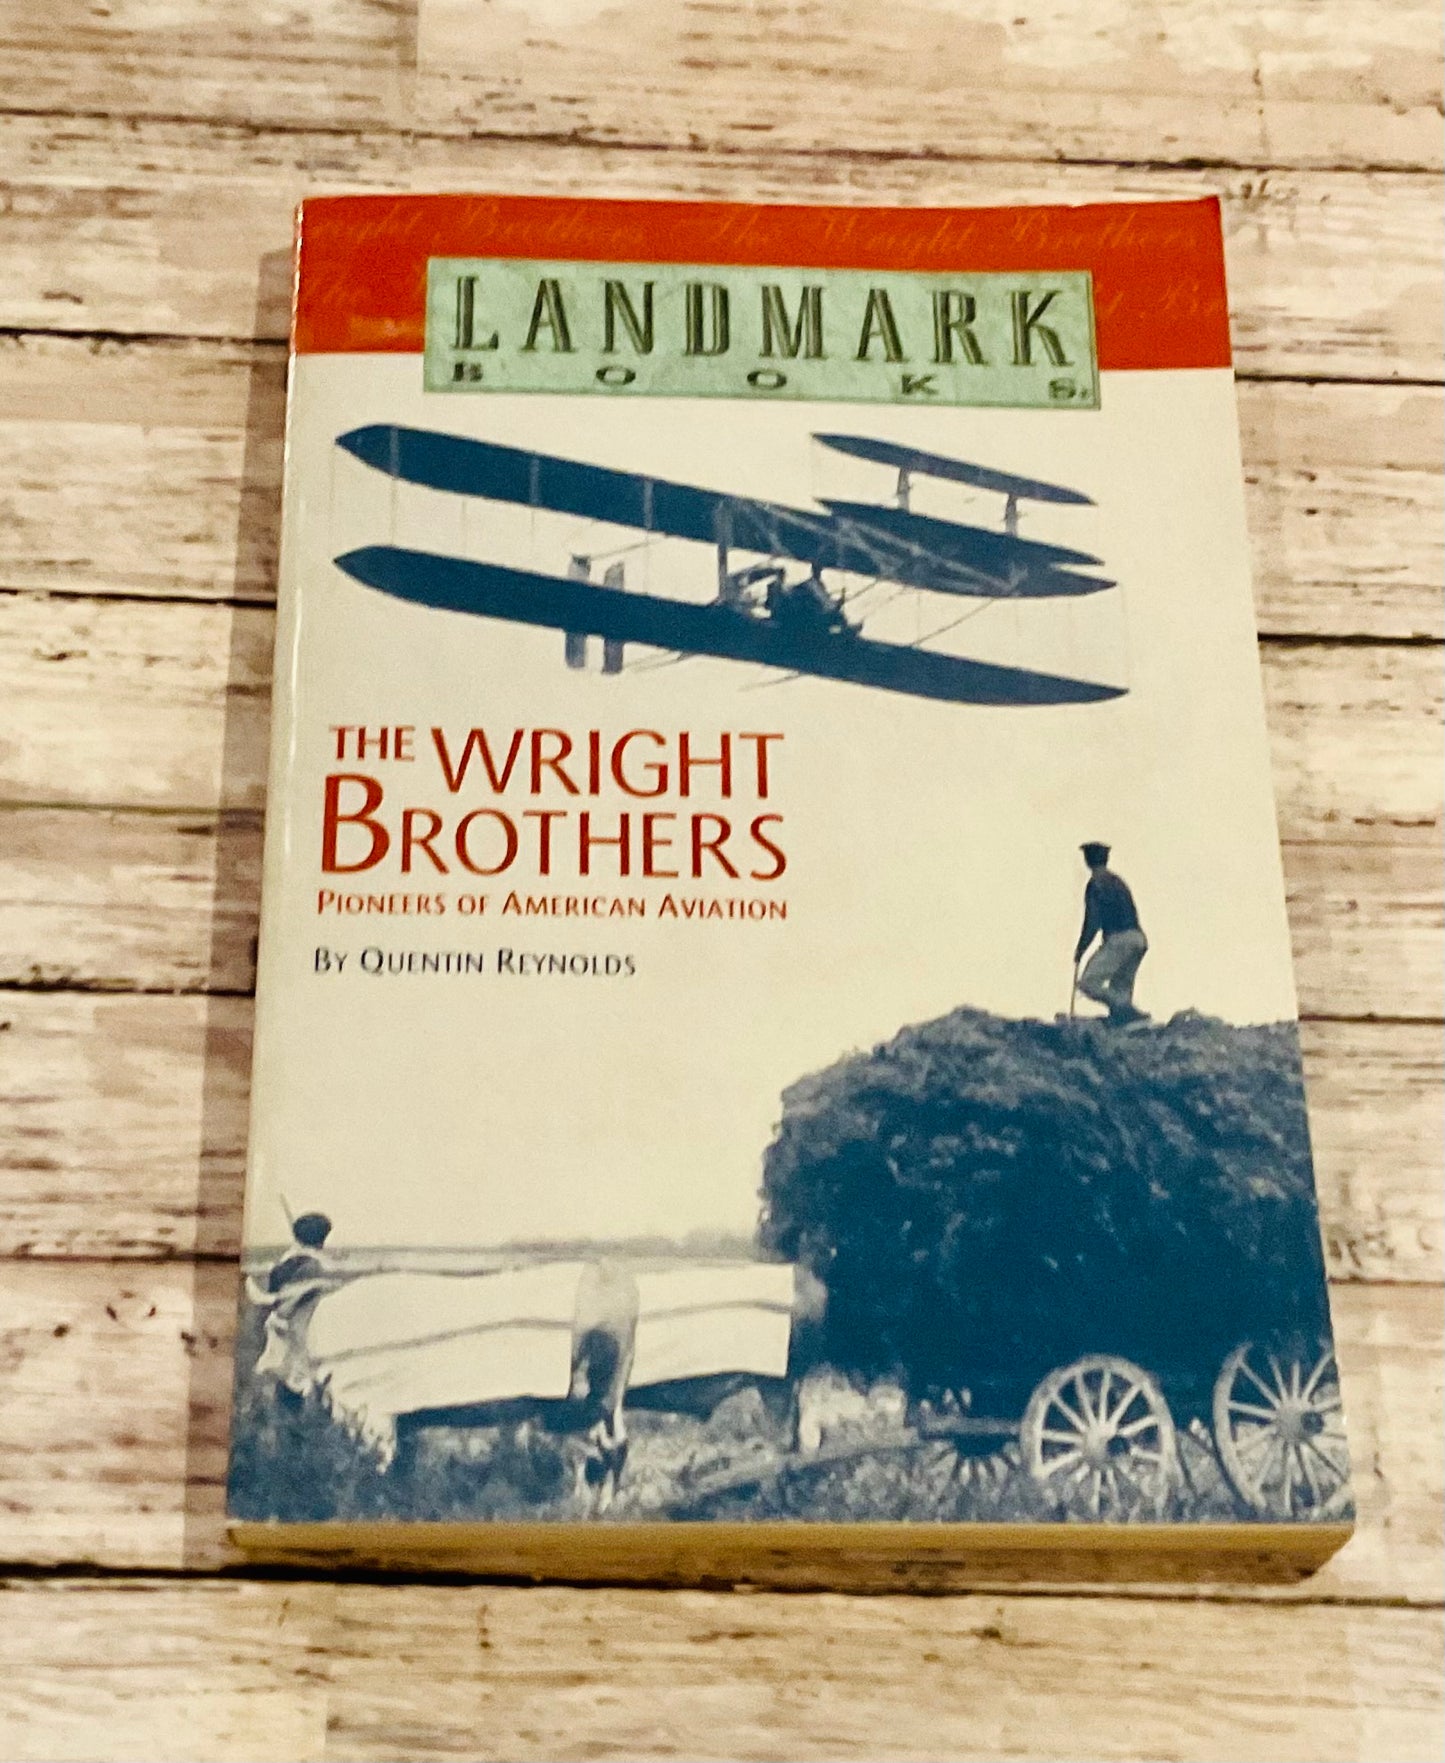 The Wright Brothers: Pioneers of American Aviation - Anchored Homeschool Resource Center